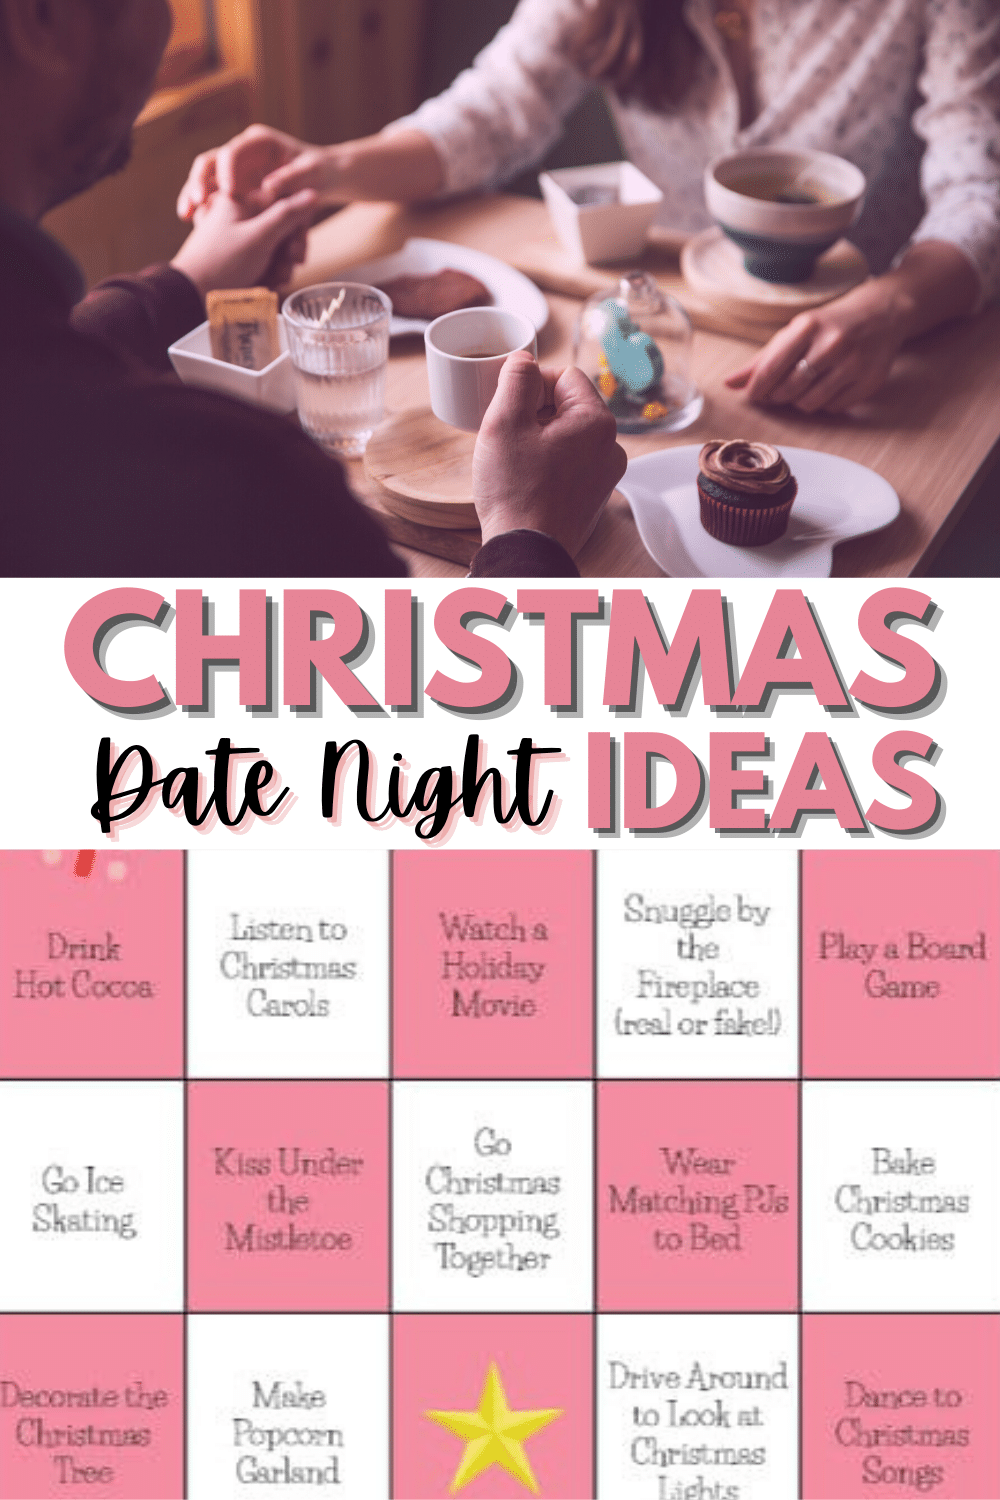 Finding unique Christmas Date Ideas is easy with this fun bingo-style printable. It is worth it to make time for your relationship during the holidays. #christmasdates #printables #christmasprintables via @wondermomwannab